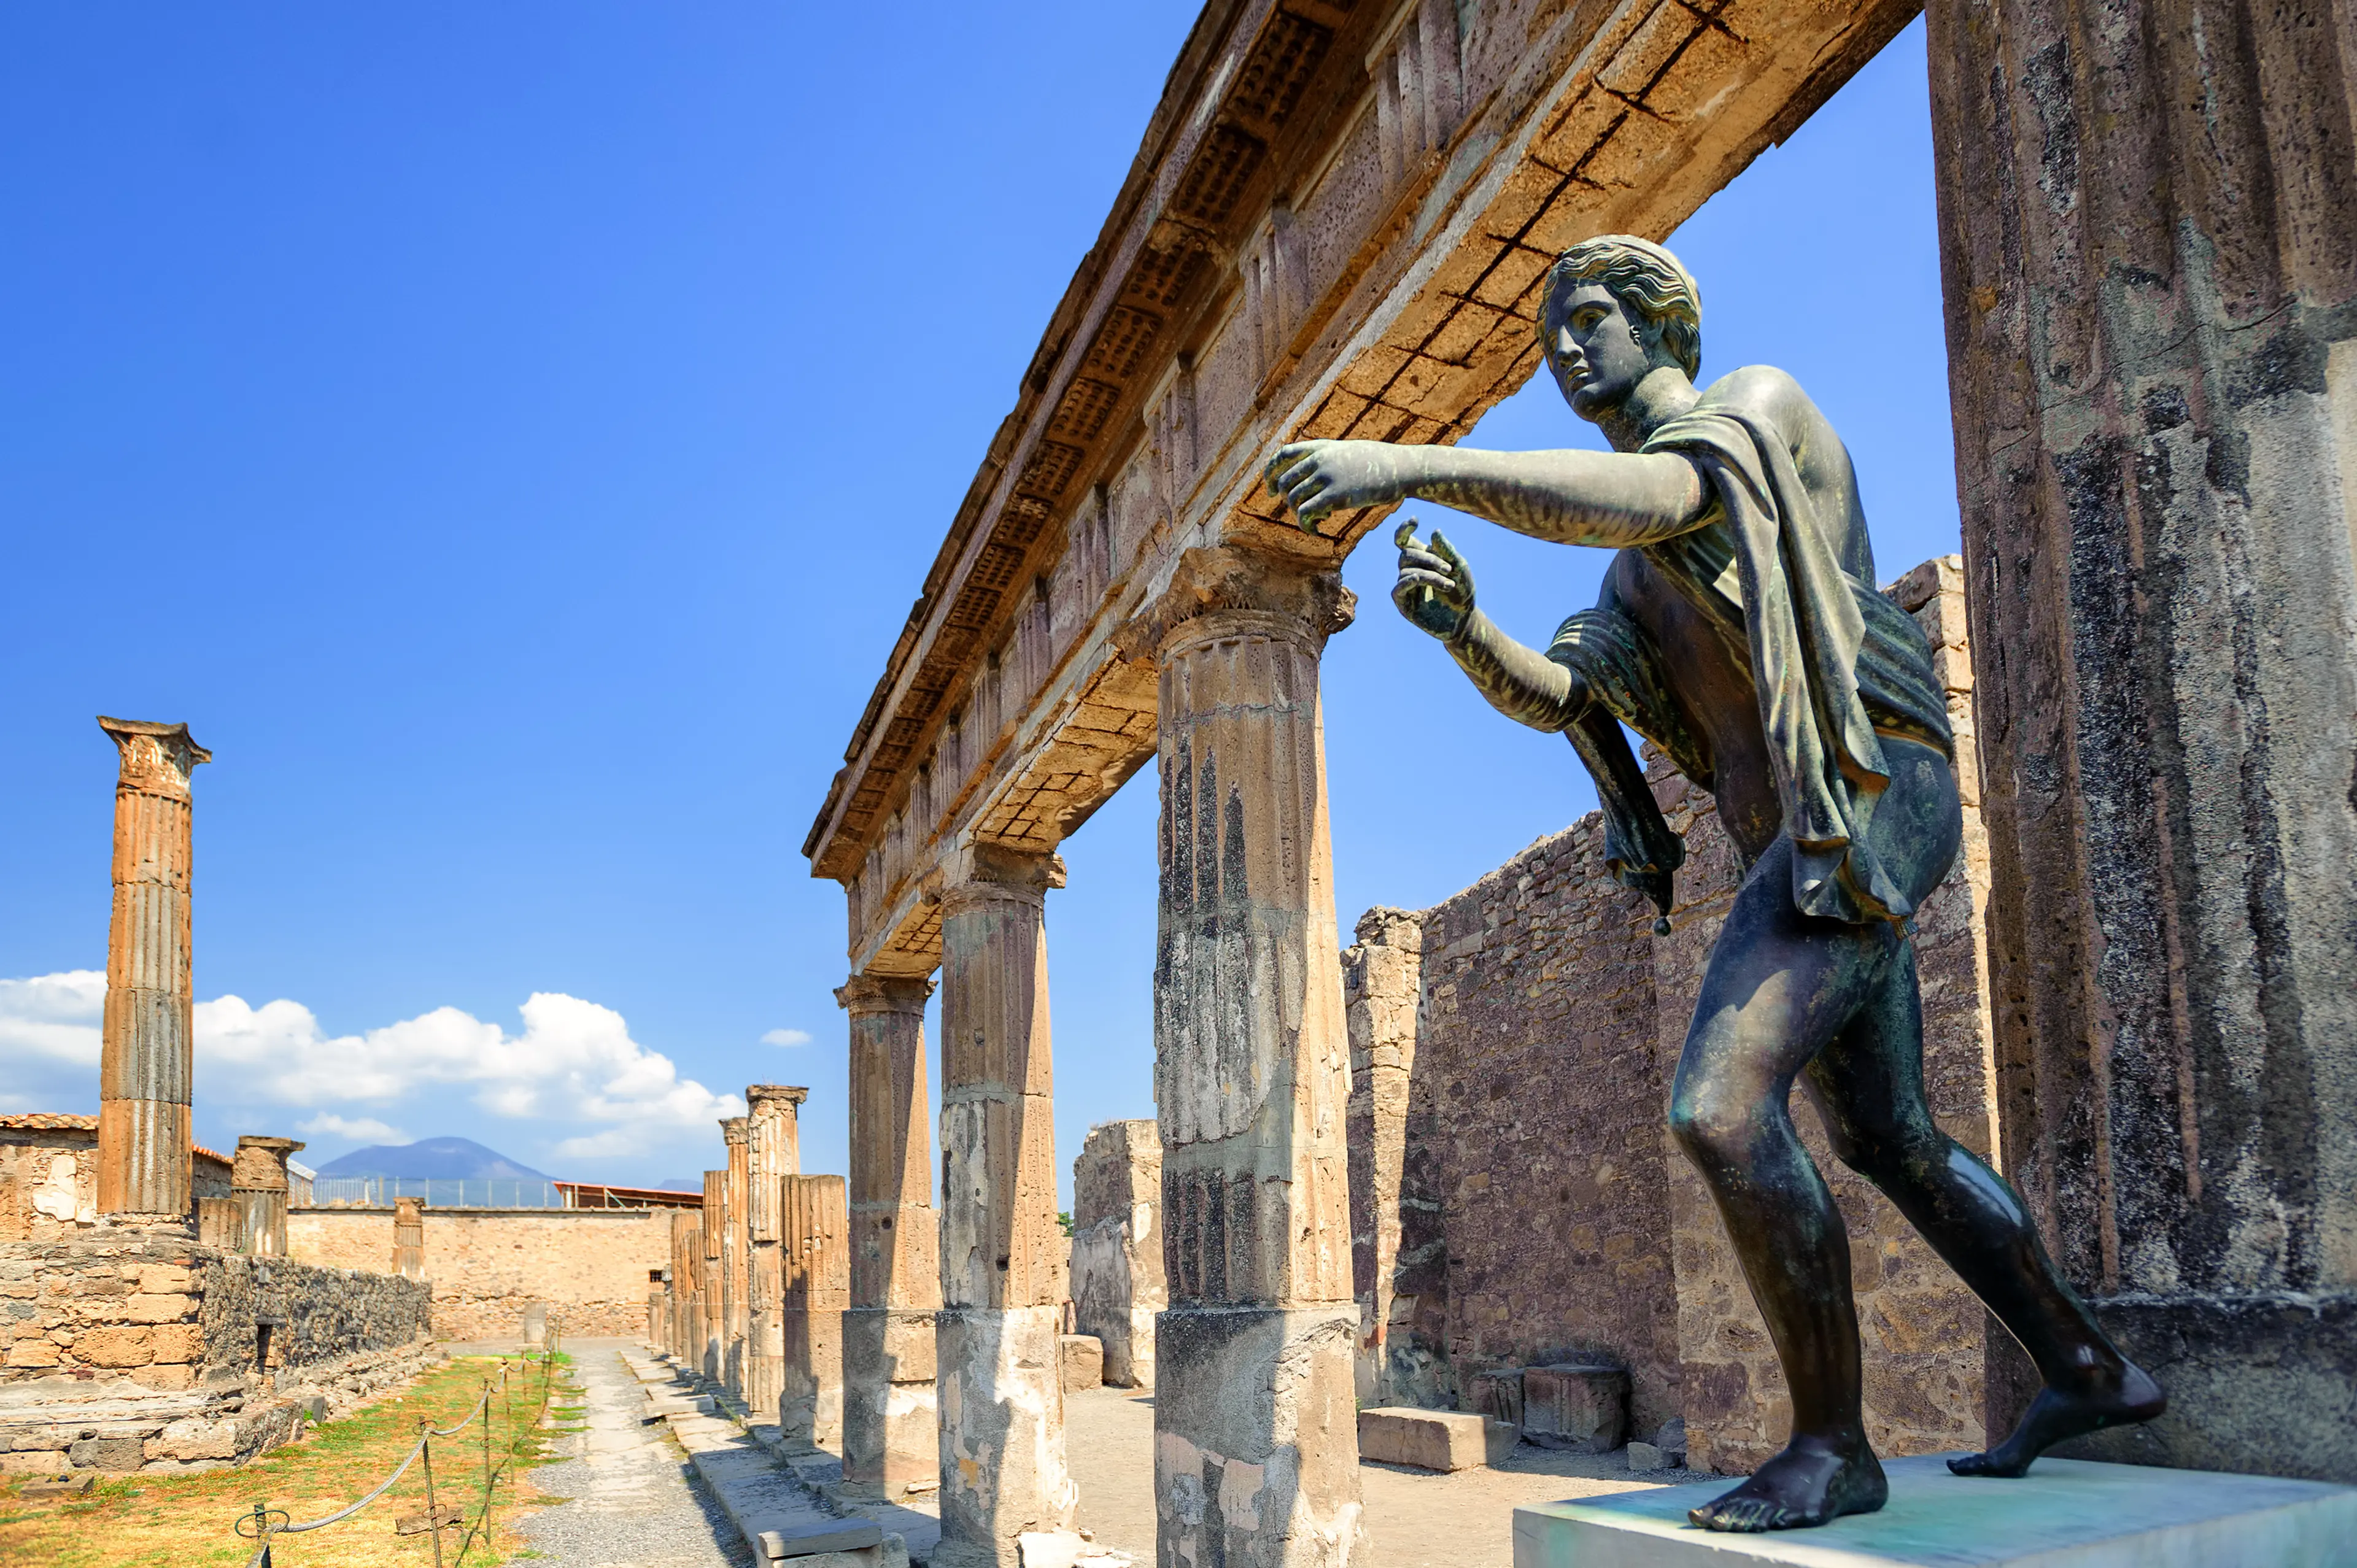 1-Day Solo Shopping Extravaganza in Pompeii, Italy